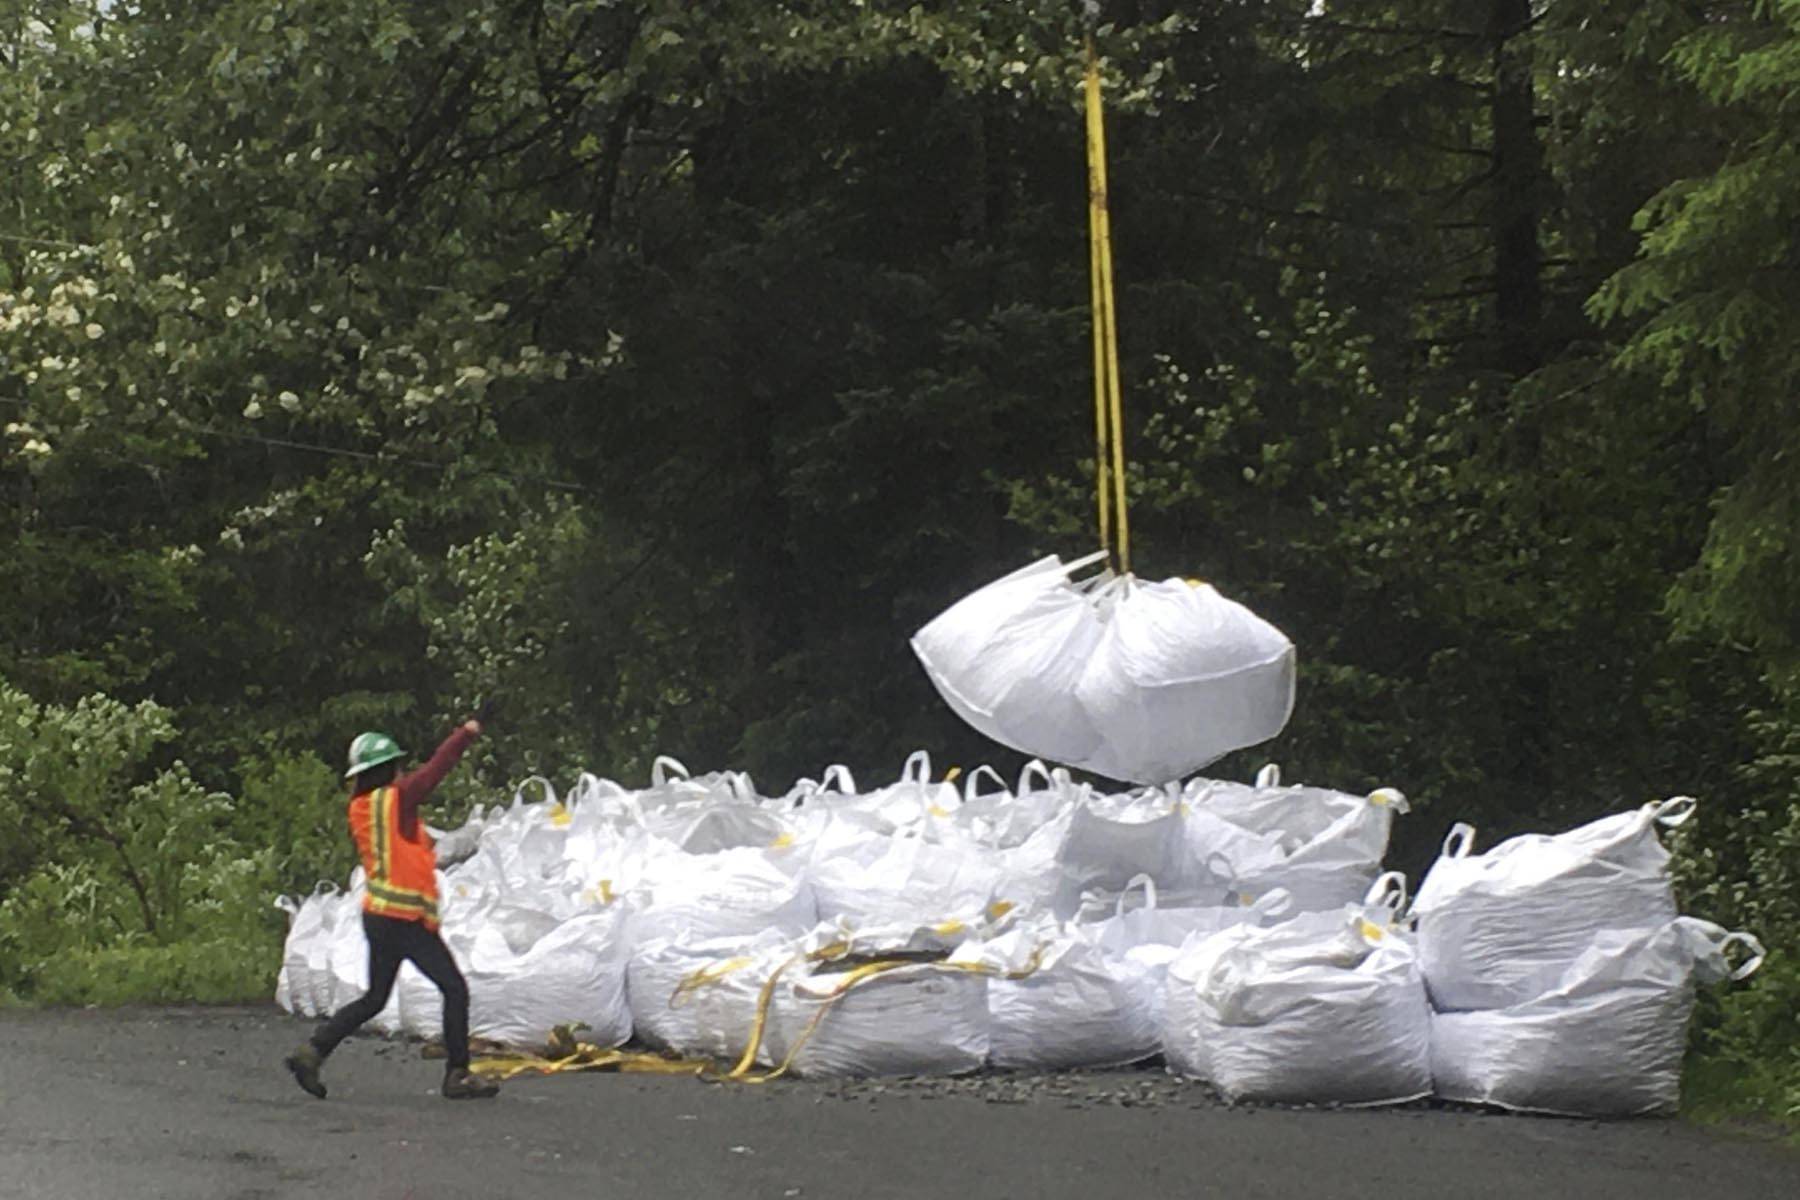 Allison Mickelson, a Trail Mix Inc crew member, guides a multiton load of gravel off a storage area as a K-Max heavy lift helicopter to slingloads it to the construction area on the Horse Tram Trail on Tuesday, June 23, 2020. (Michael S. Lockett | Juneau Empire)